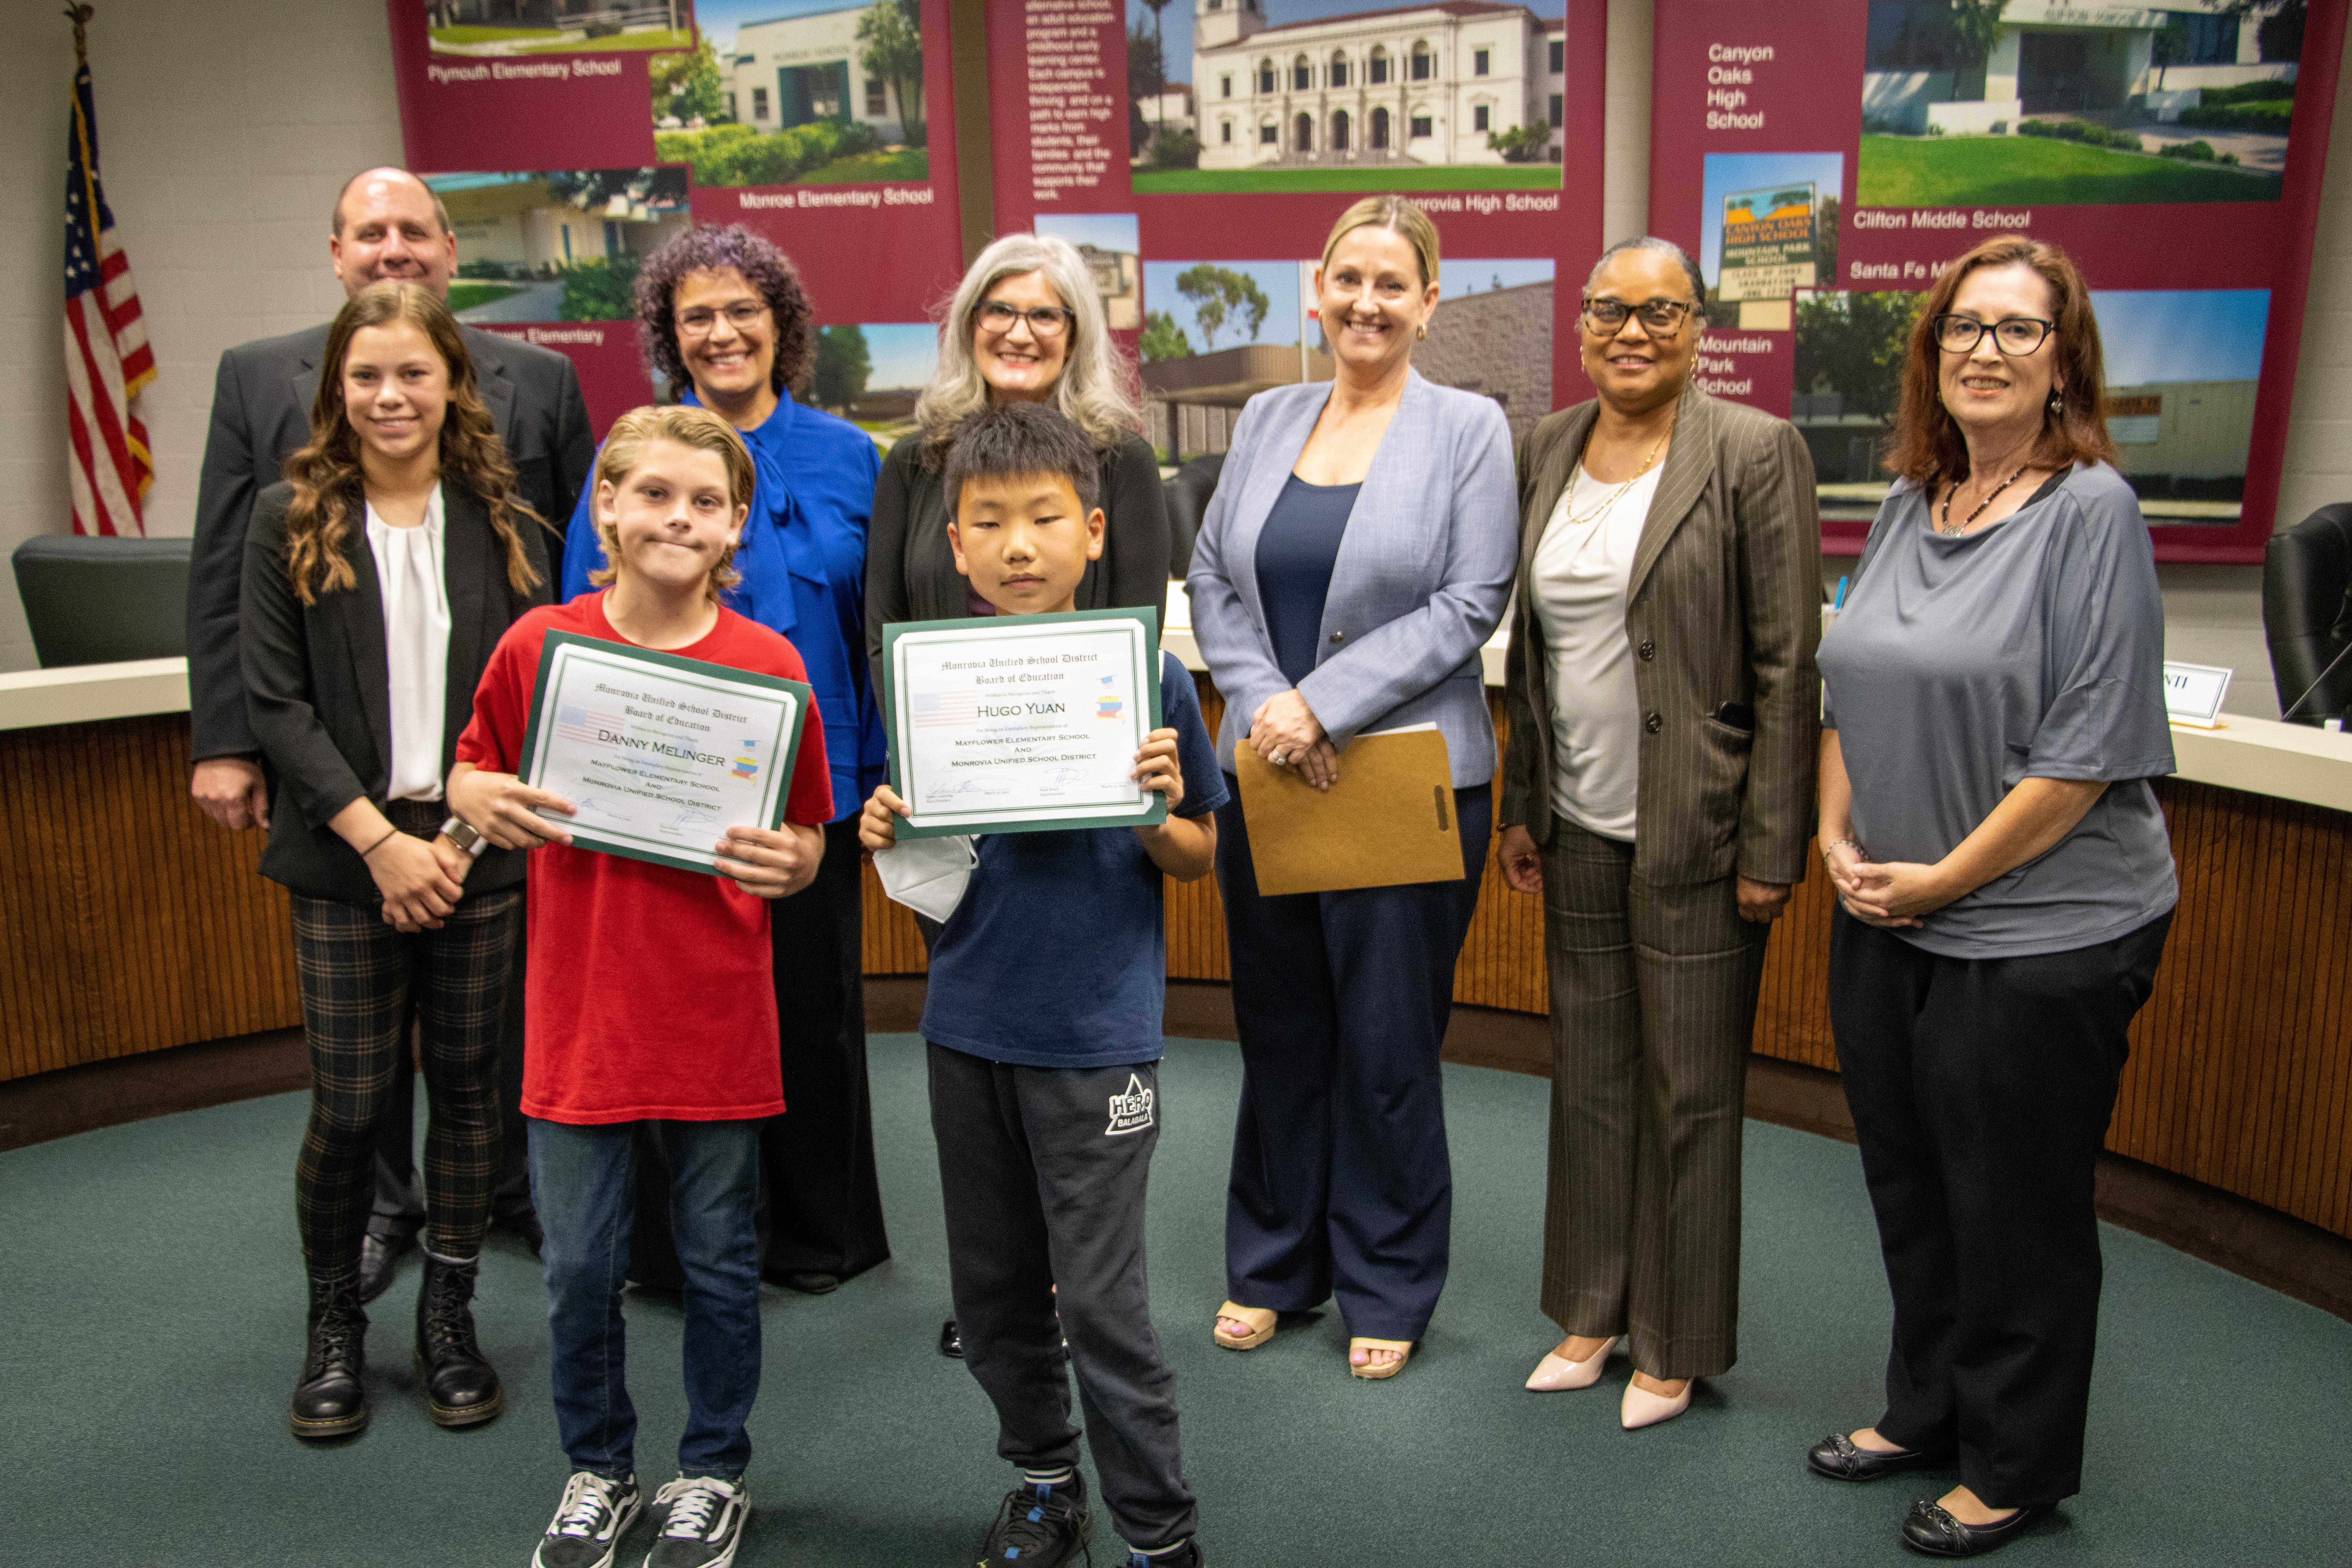 The Board of Education invited students from Bradoaks and Mayflower Elementary Schools to lead the March meeting’s Pledge of Allegiance. Bobcat Laurel Traeger and Mariners Danny Melinger and Hugo Yuan did an amazing job starting the meetings with the pledge.